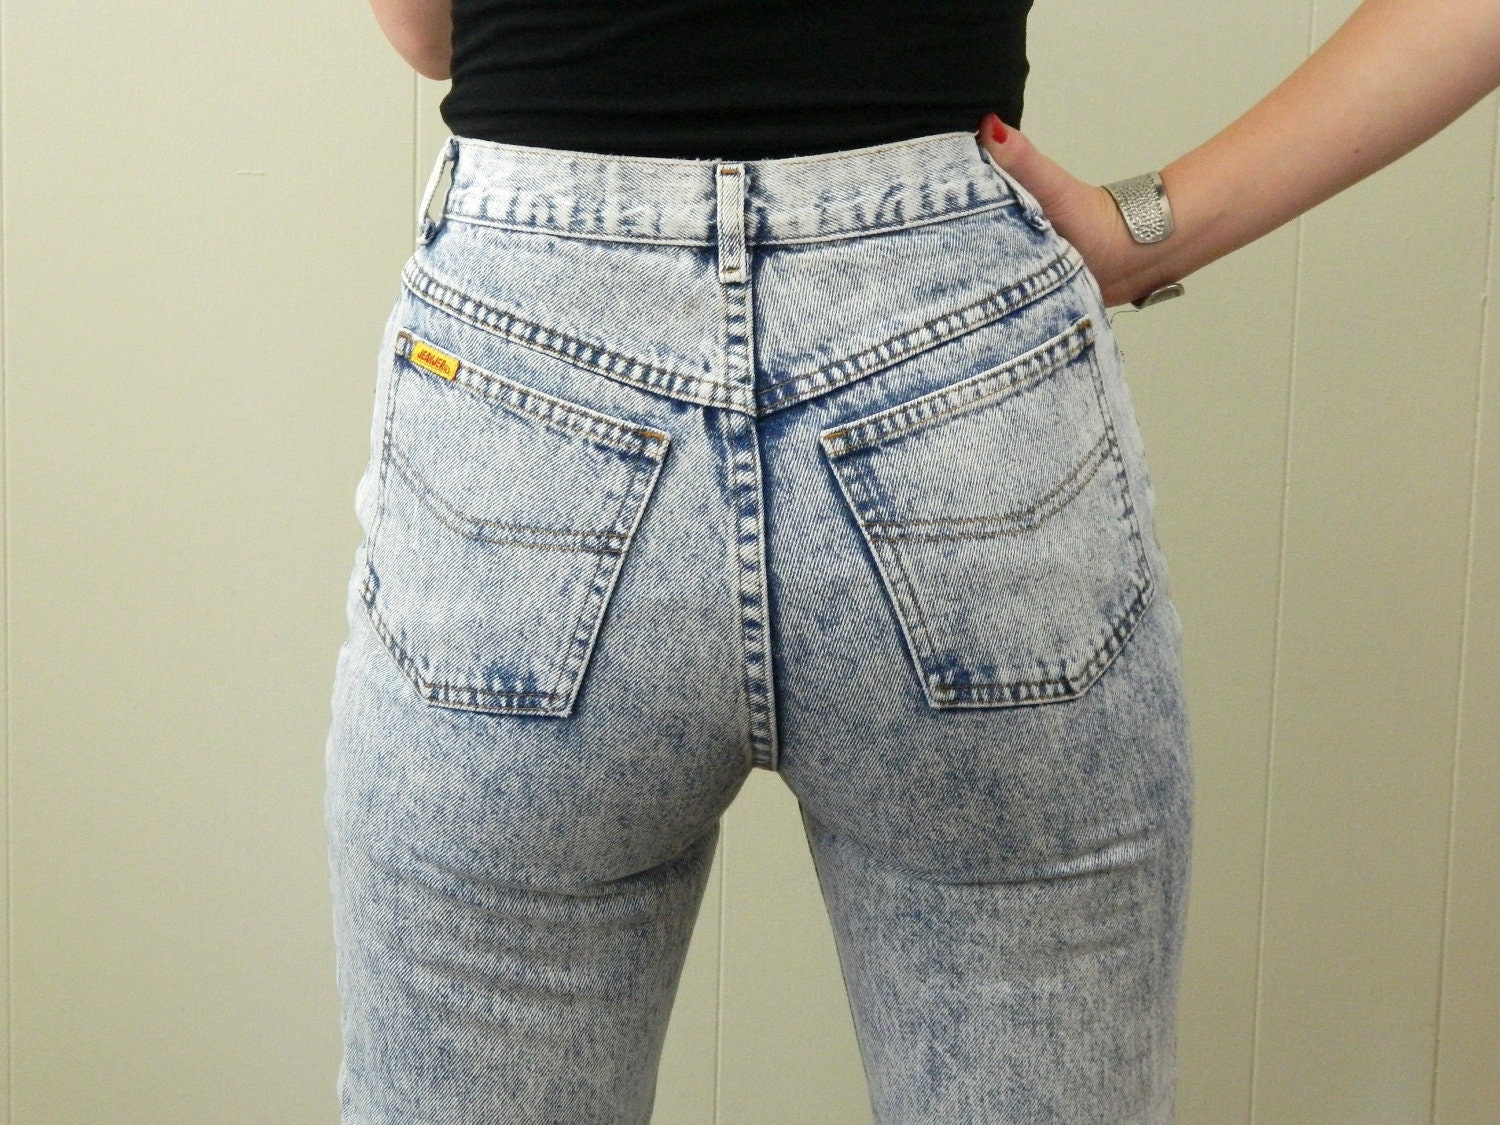 80s High Waisted Acid Wash Skinny Jeans .... Second Skin ....